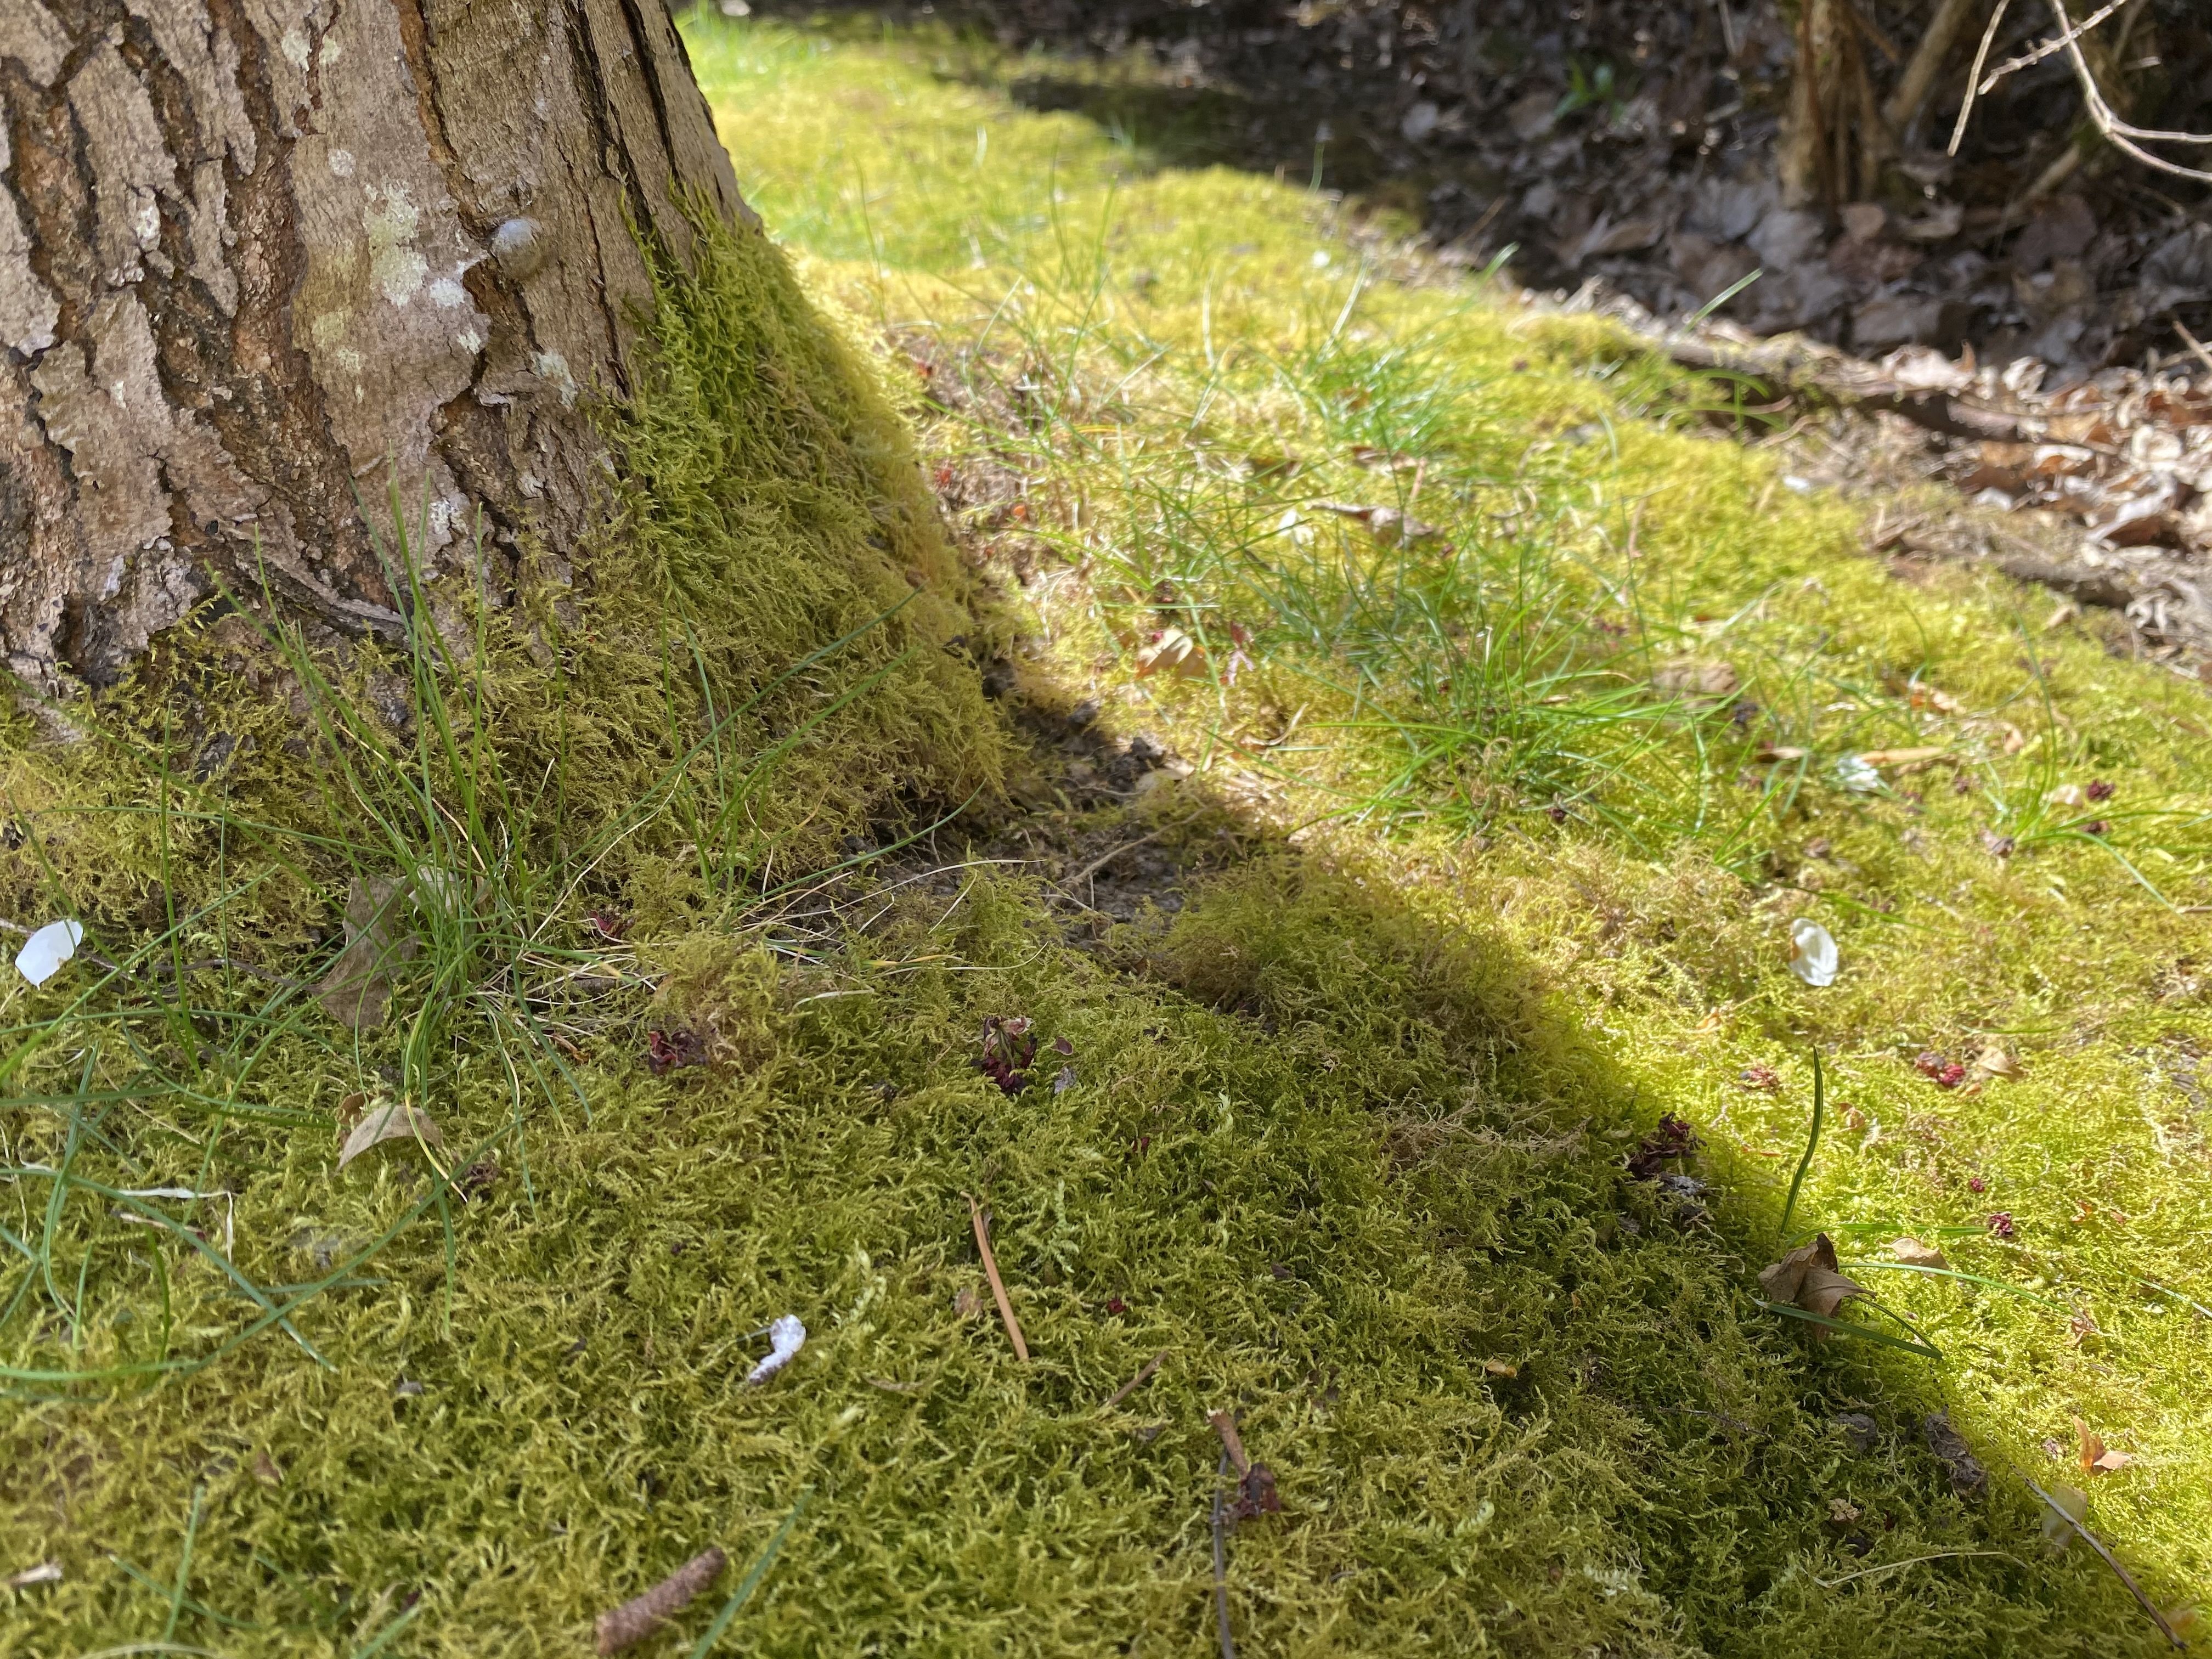 How to Control Lawn Algae and Moss - Natural Alternative